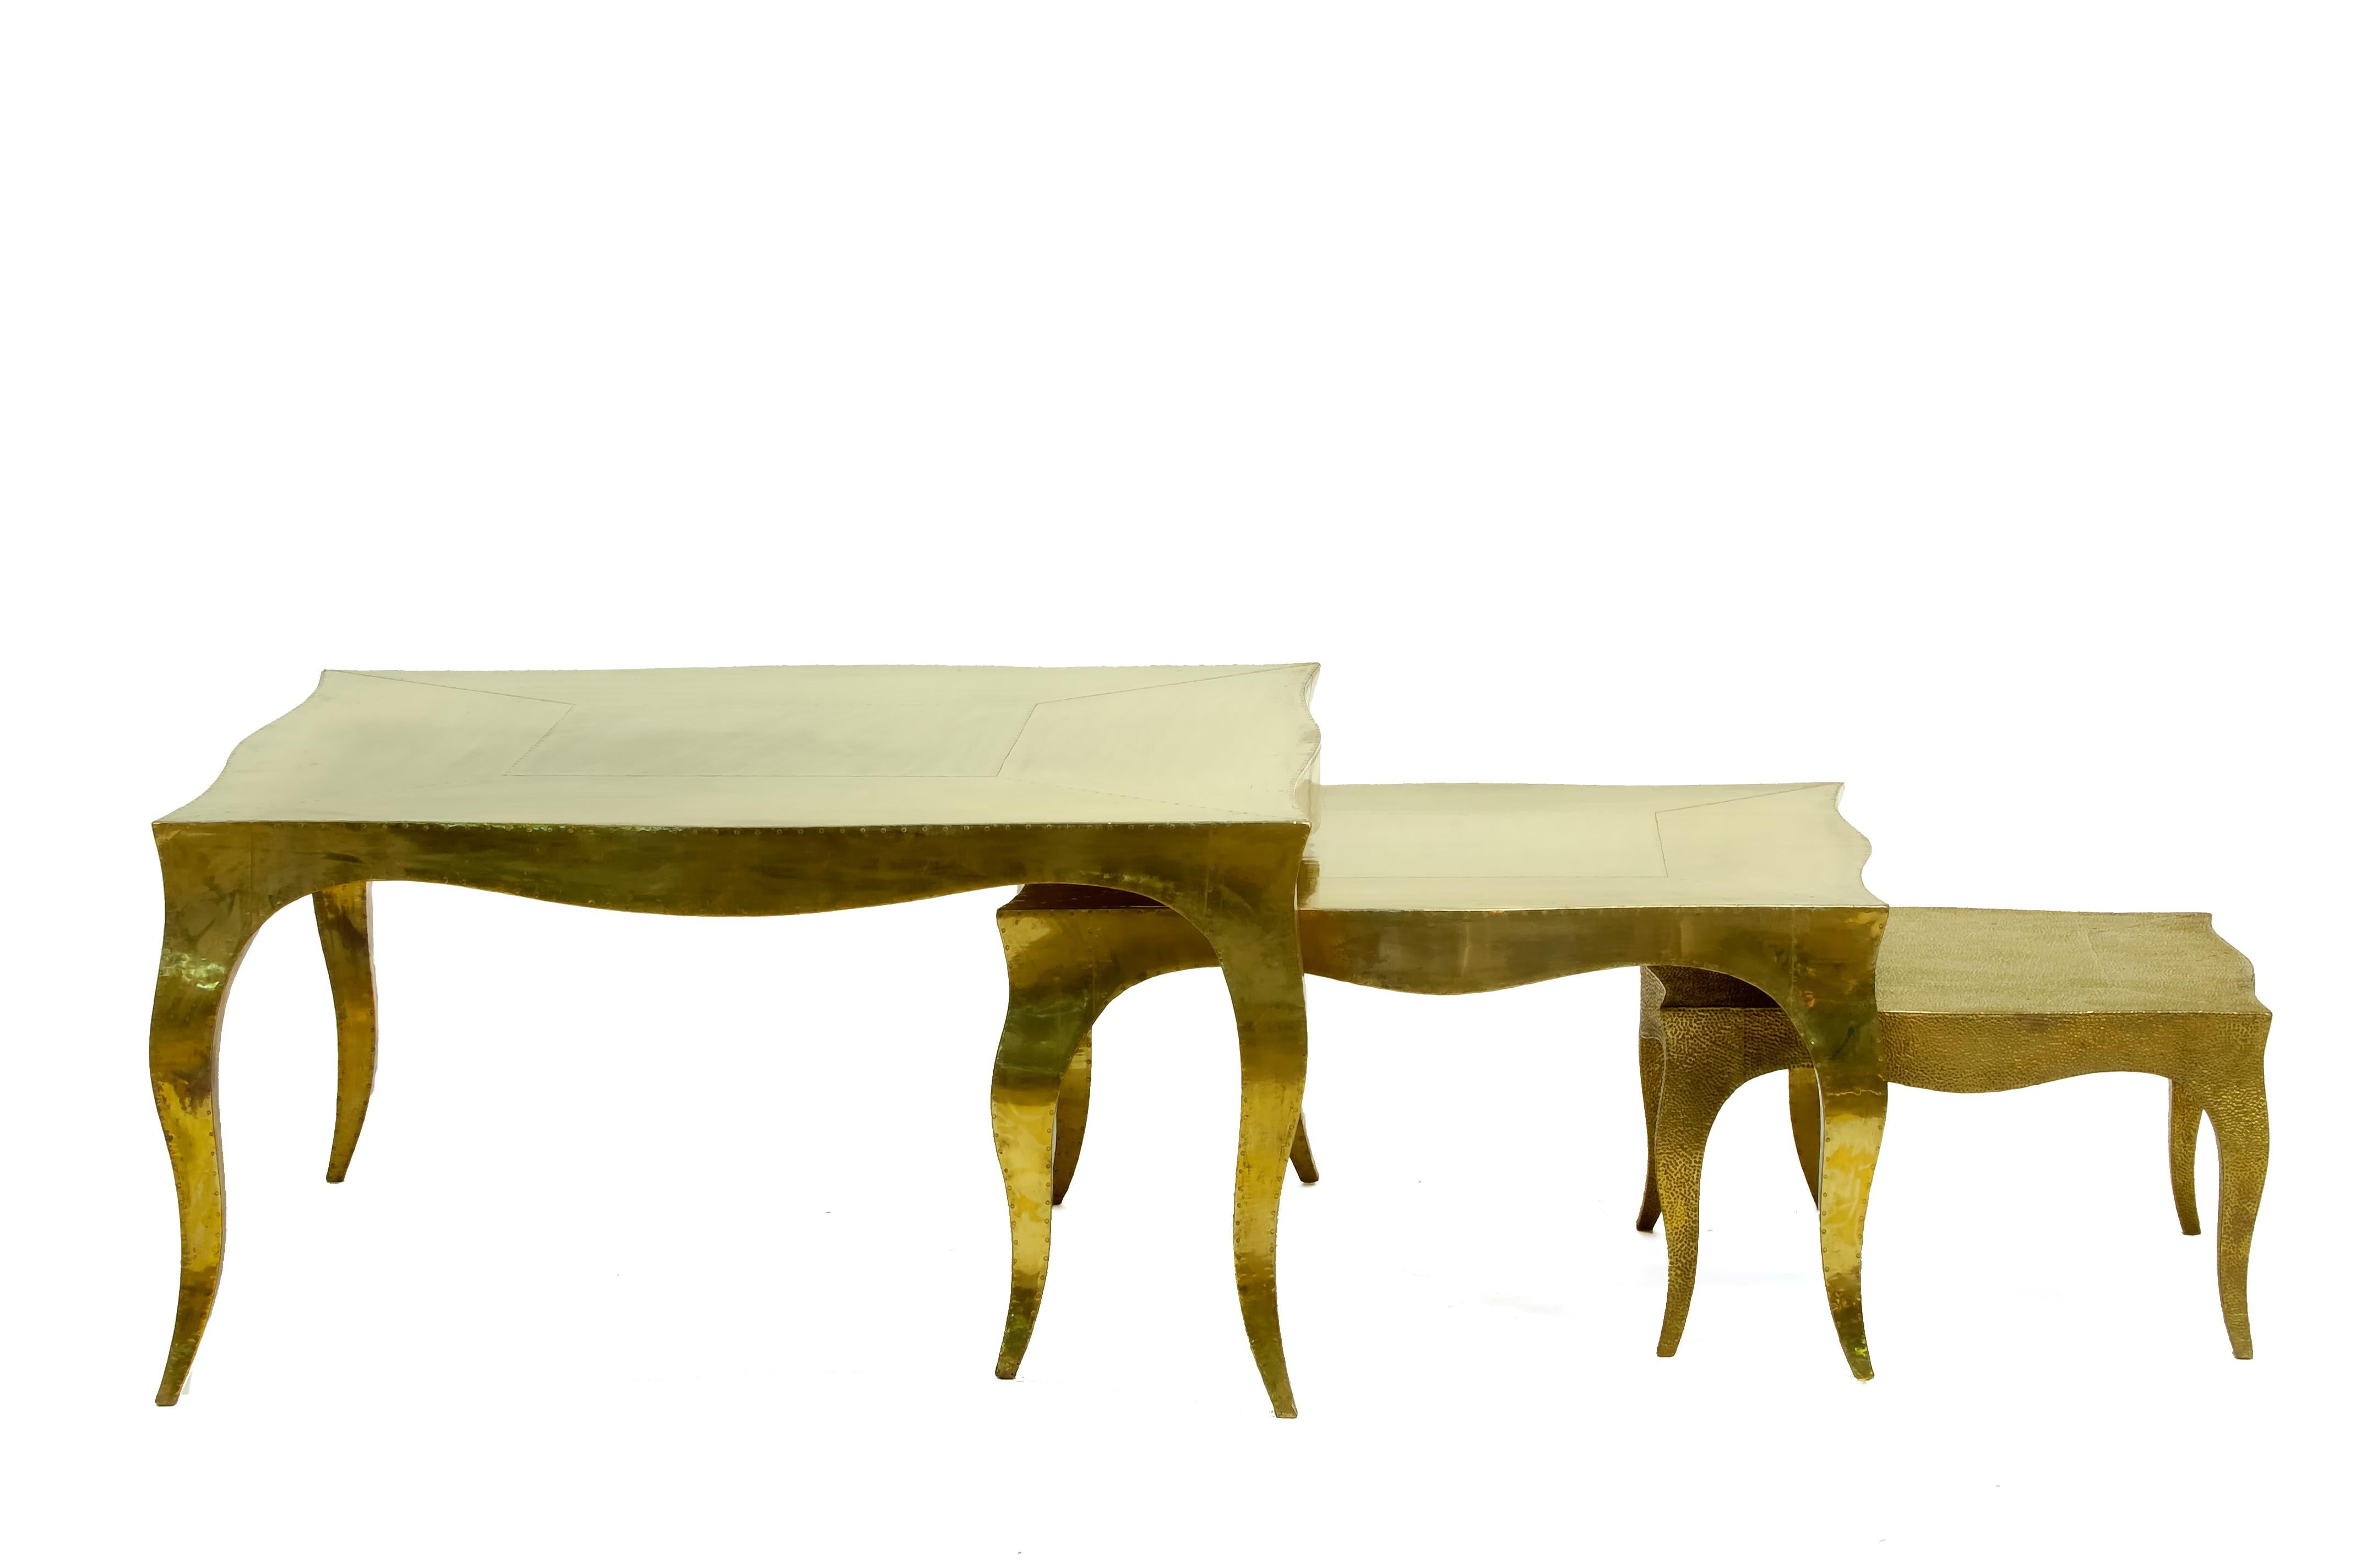 Louise Art Deco Industrial and Work Tables Mid. Hammered Brass 18.5x18.5x10 inch For Sale 7